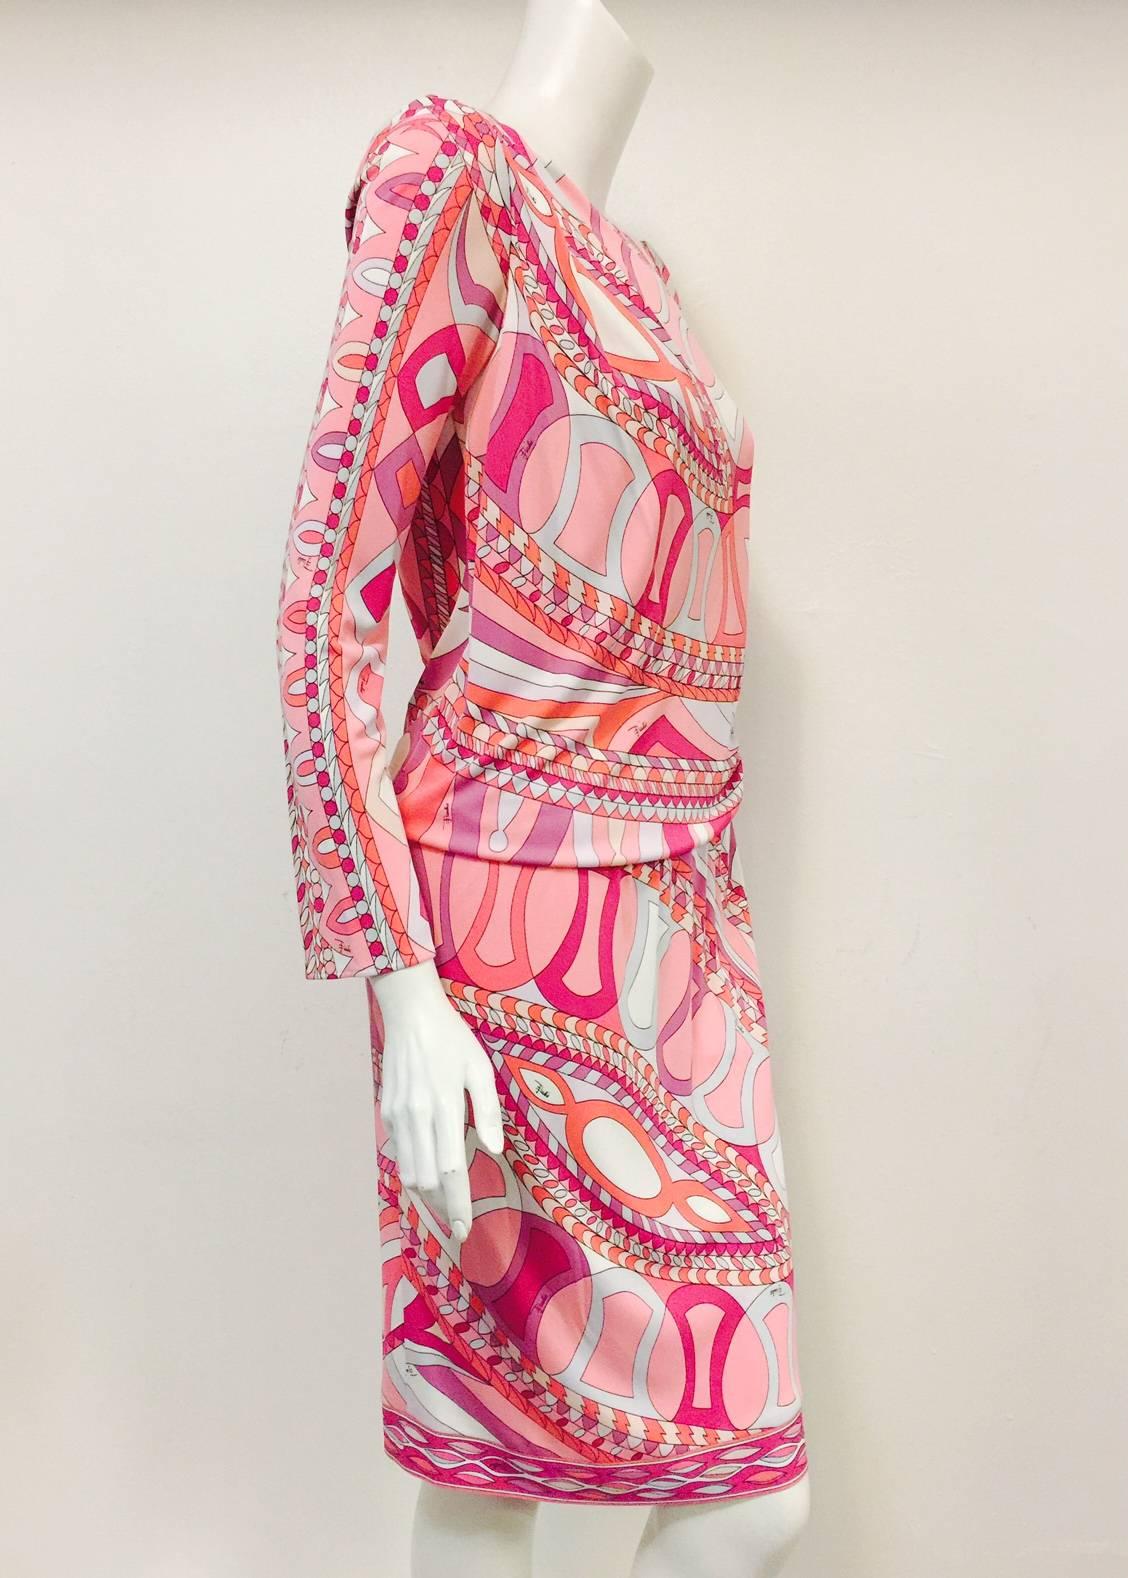 Print Sheath Dress With Long Sleeves is quintessentially Emilio Pucci! Abstract fuschia, mauve, black and white pepper print highlights a form-fitting, flattering design. Reminiscent of the 1920s, dress is draped and gathered at the waist and left